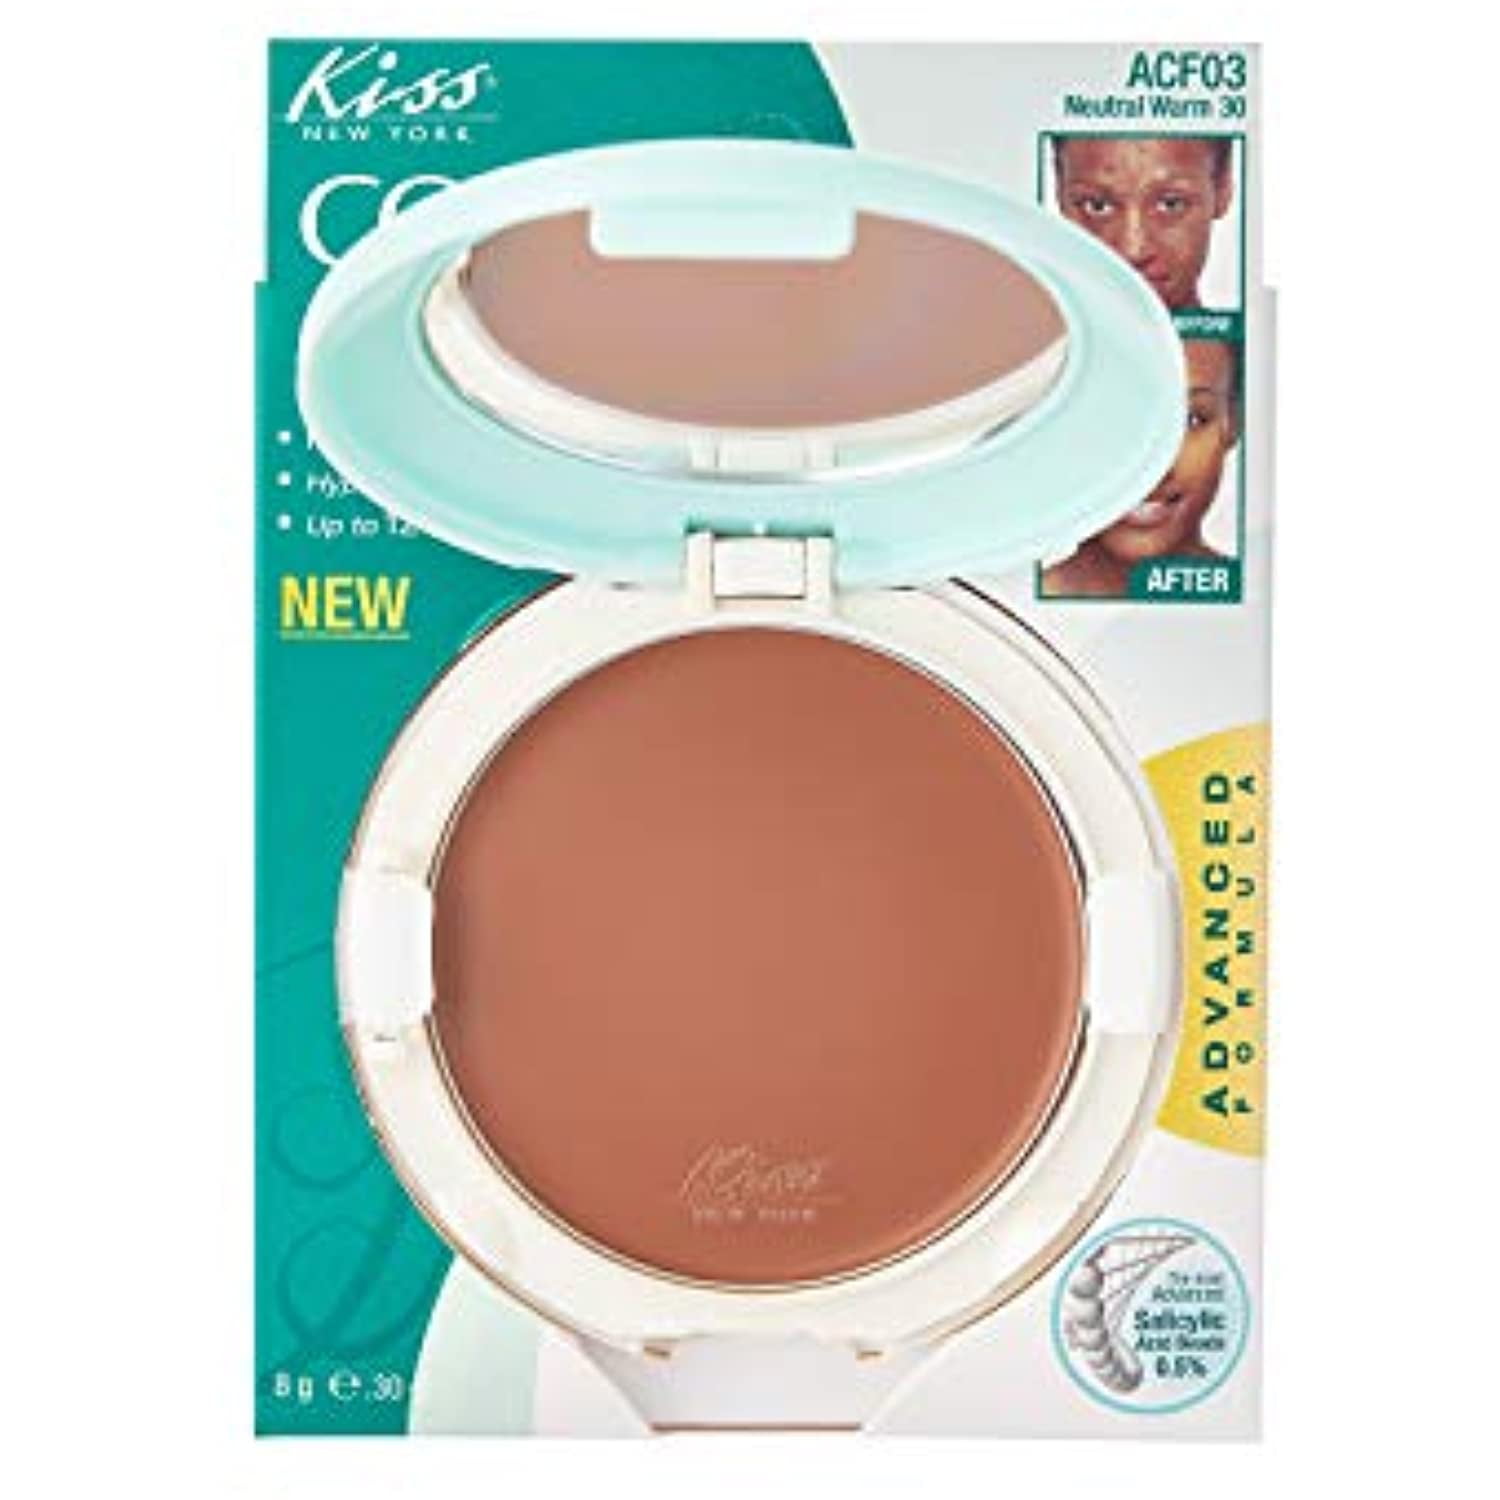 Kiss New York Cover And Care Cream Foundation Neutral Warm 30 Acf03